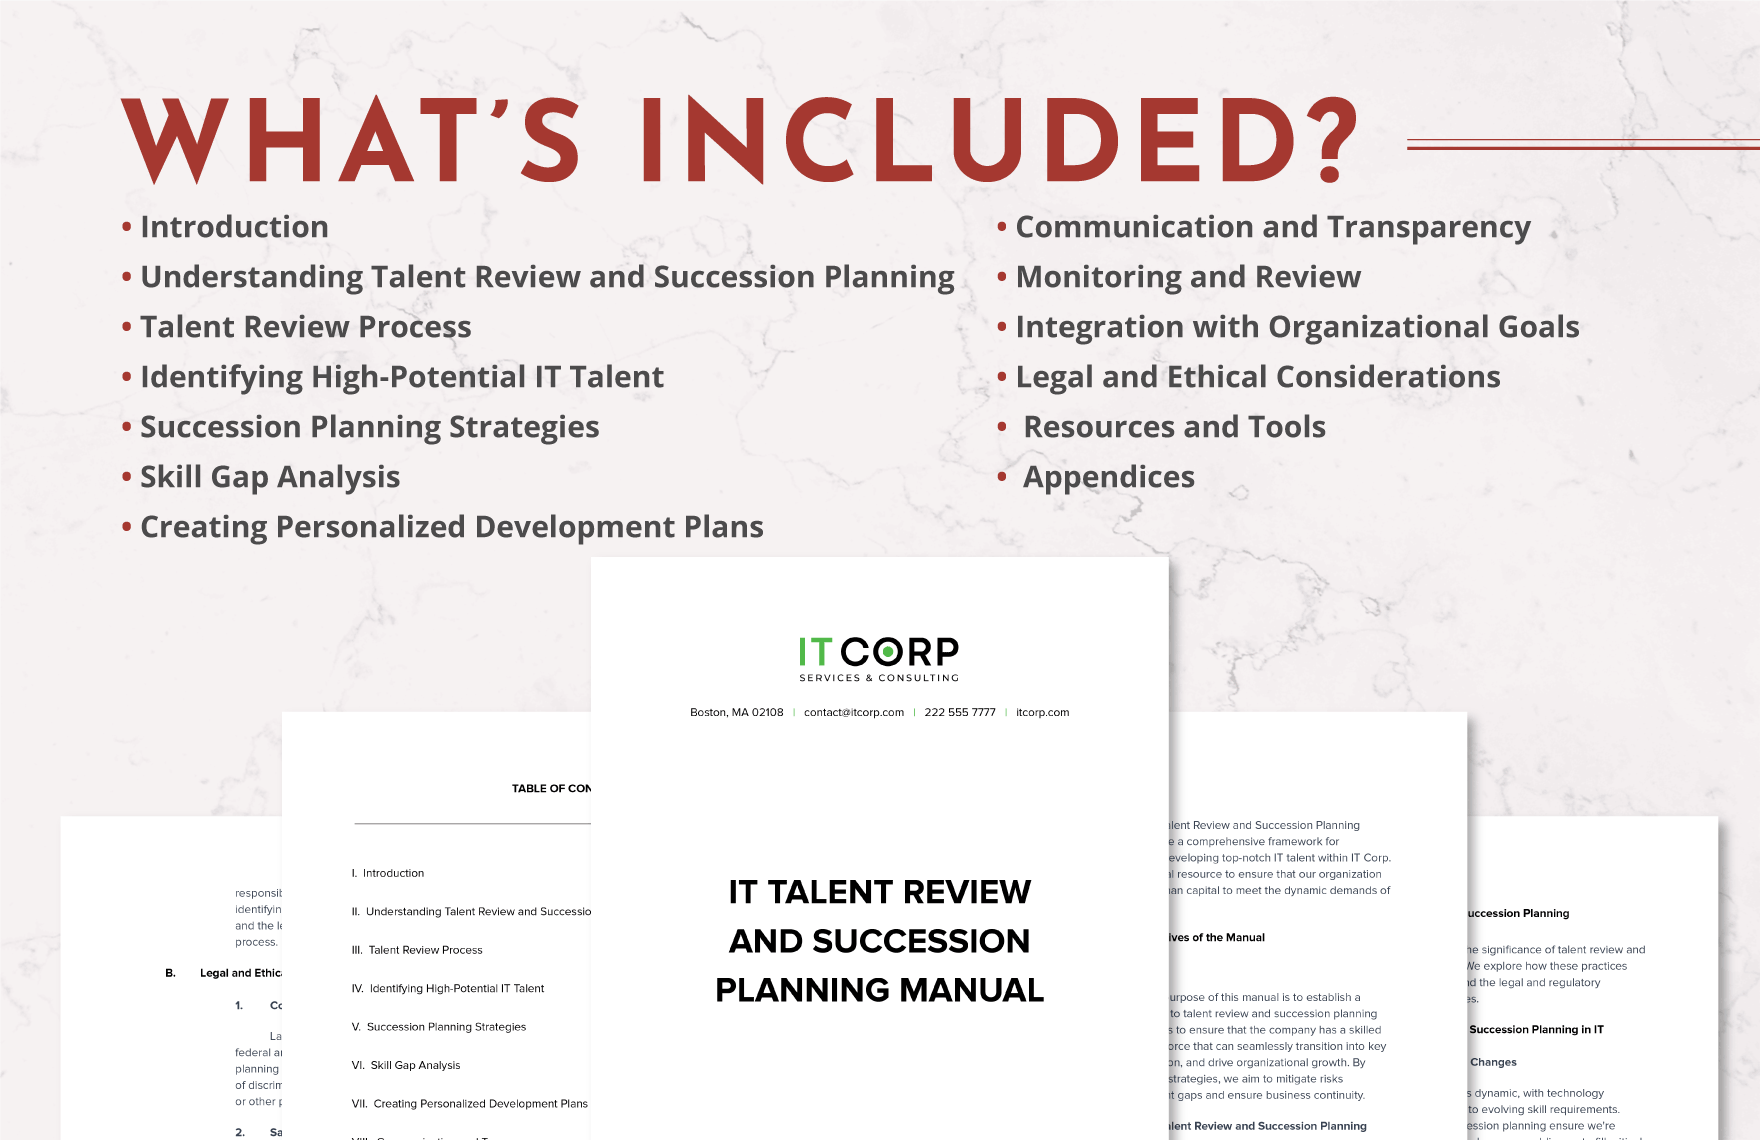 IT Talent Review and Succession Planning Manual Template